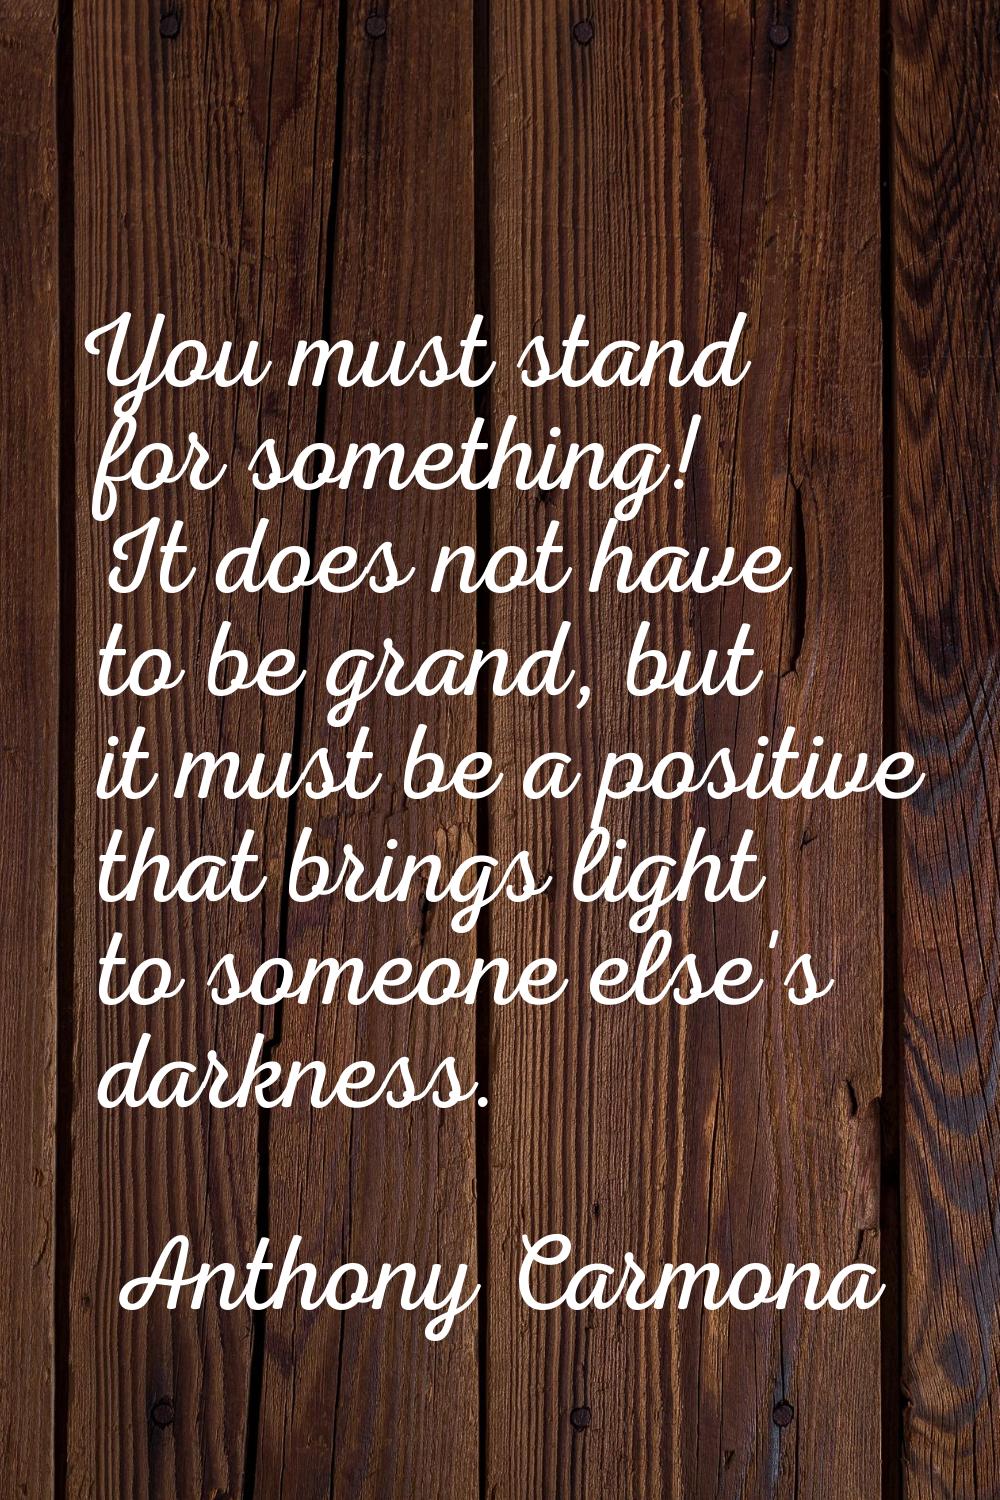 You must stand for something! It does not have to be grand, but it must be a positive that brings l